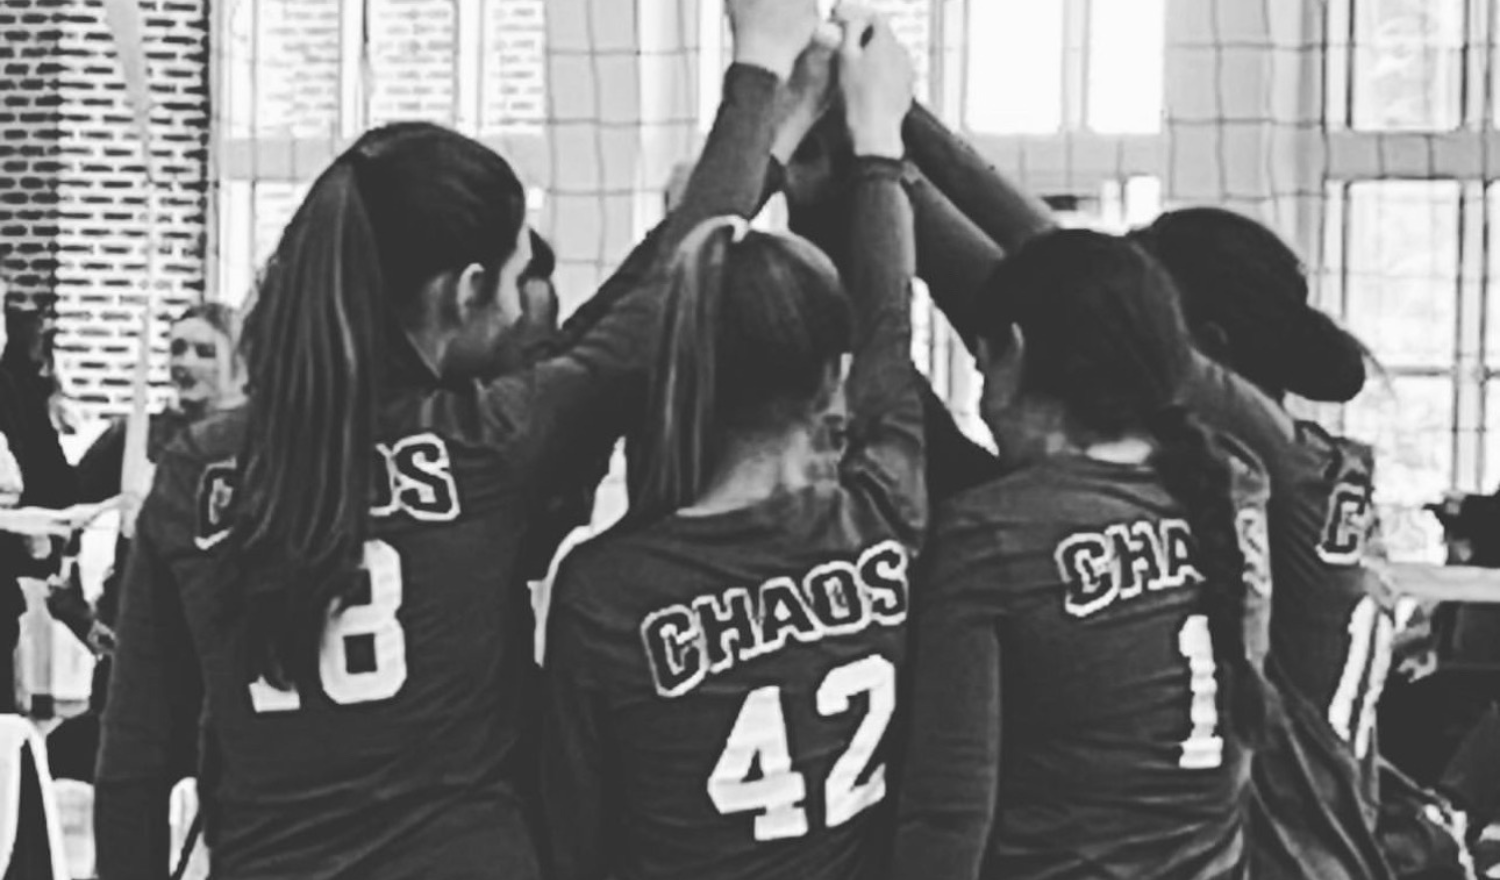 Cleveland Chaos Volleyball Club